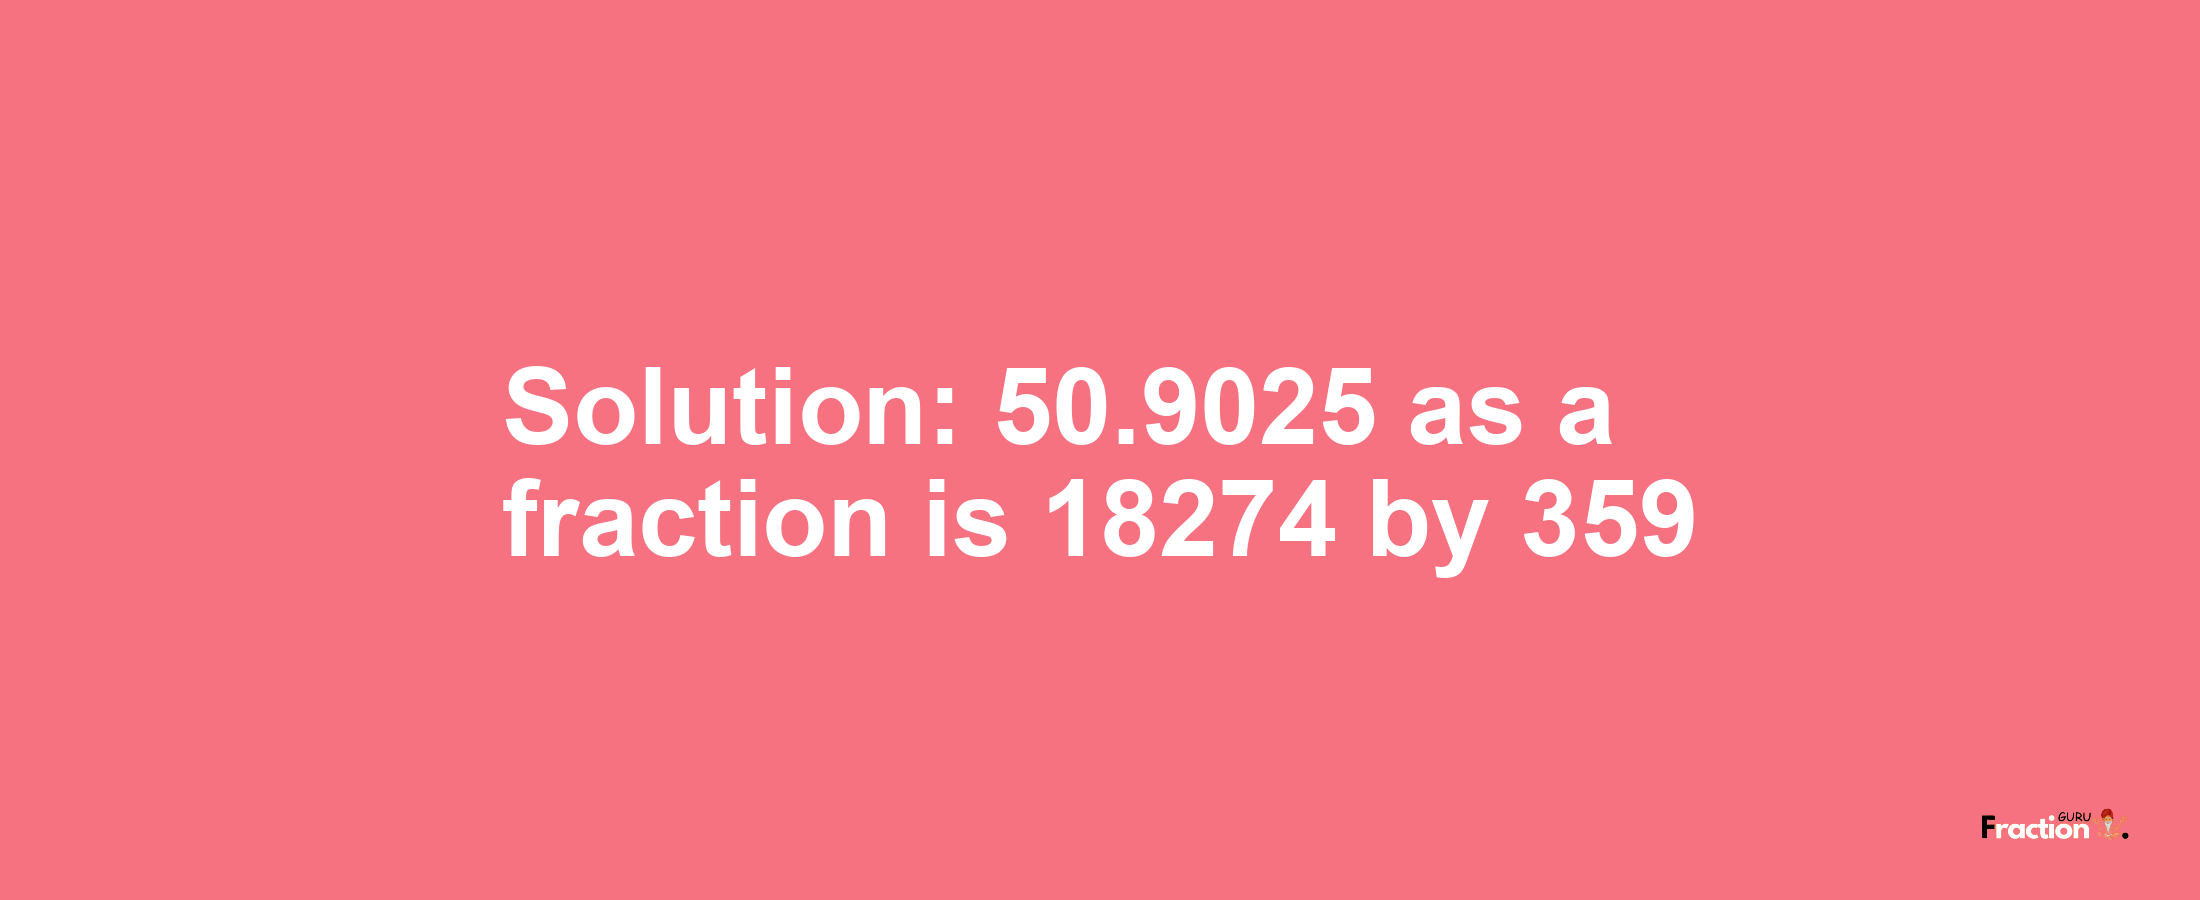 Solution:50.9025 as a fraction is 18274/359